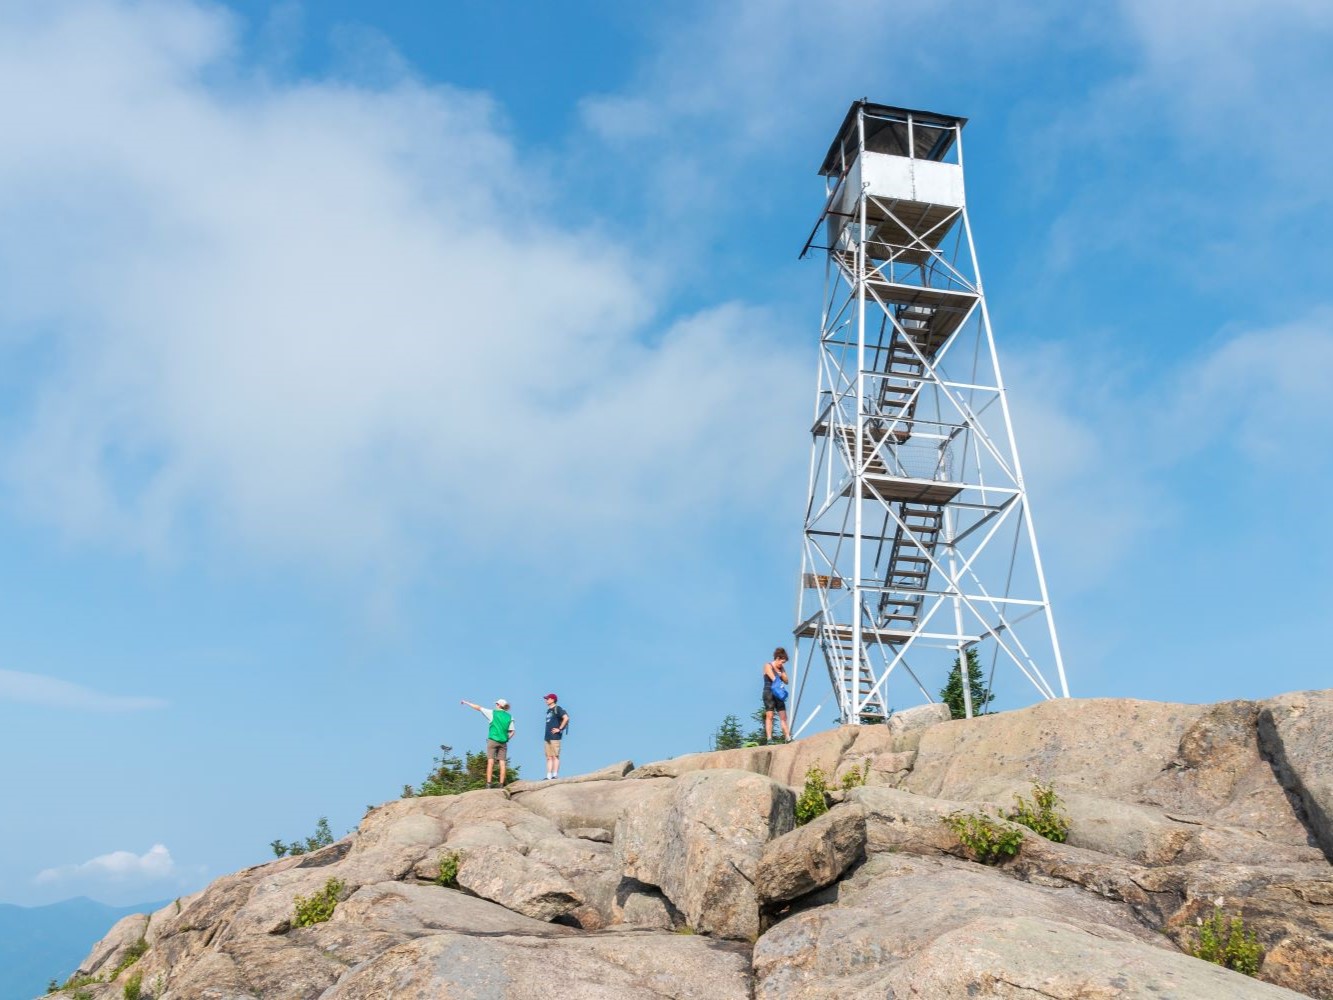 A fire tower with three people